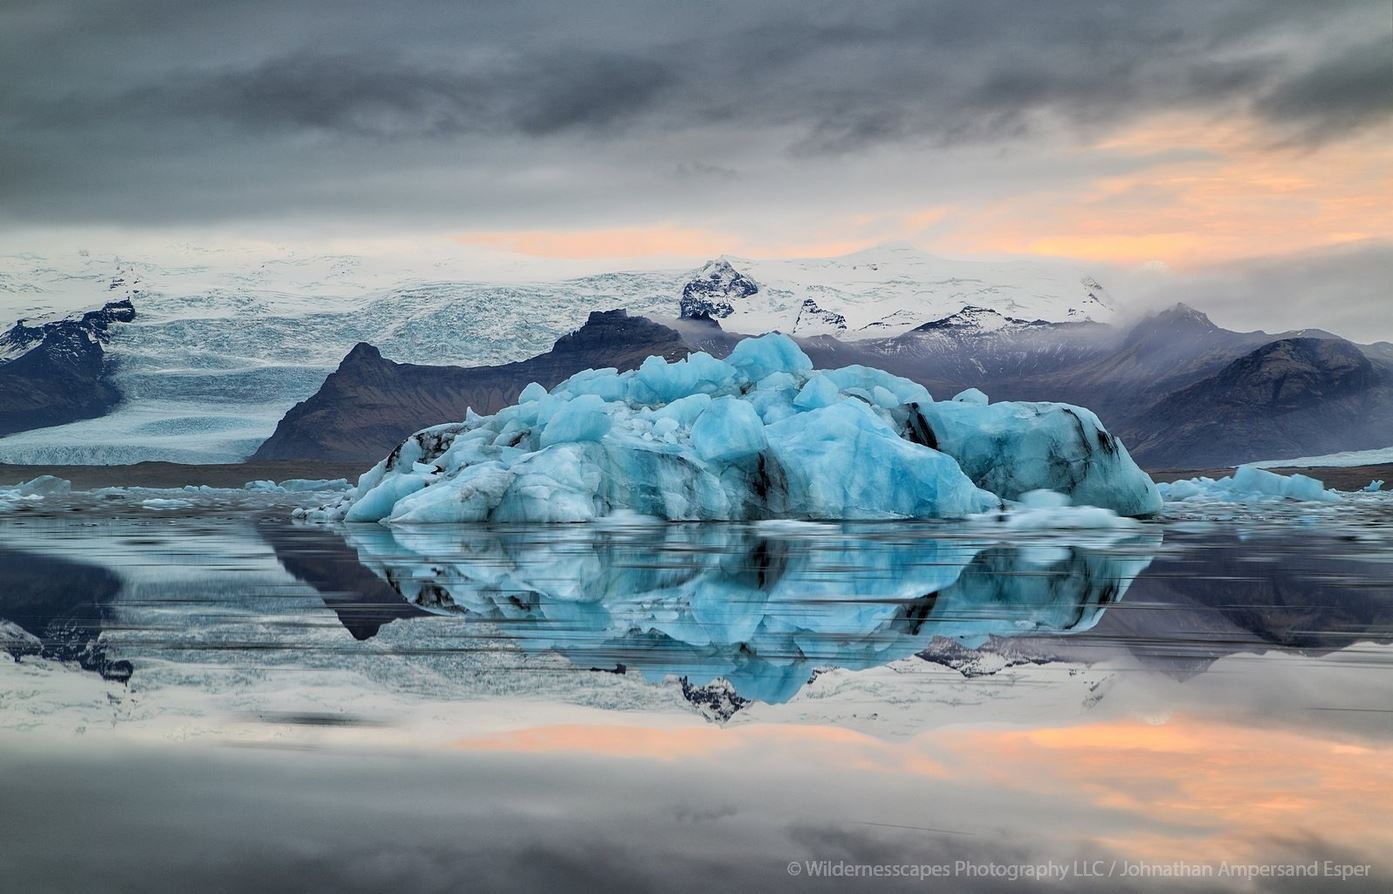 &nbsp;Glacial lagoon&nbsp;icebergs floating out to sea, Iceland.